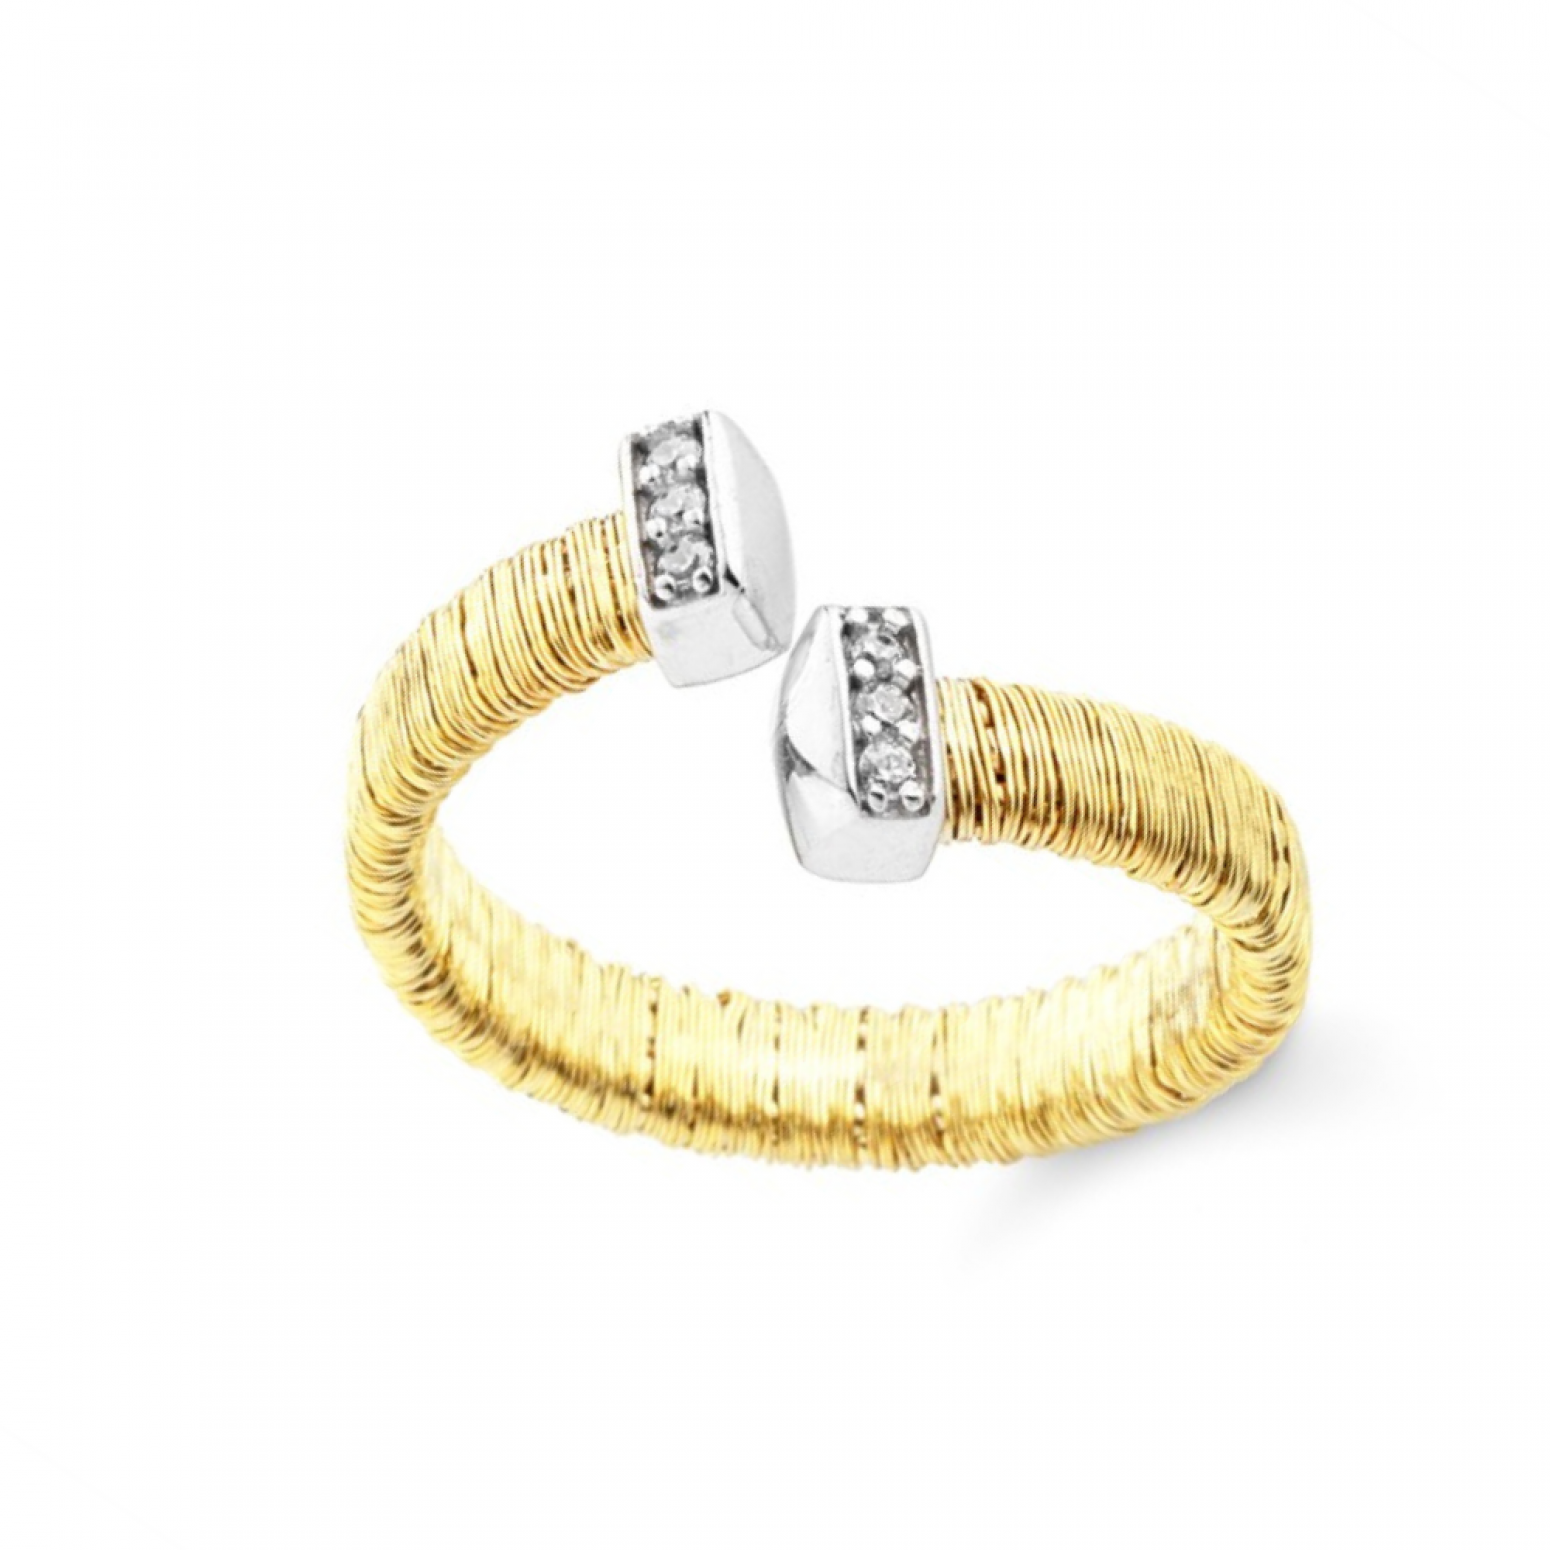 Marcello Pane ring with gold plated silver and zircon, ANCC 006, da4334 RINGS Κοσμηματα - chrilia.gr